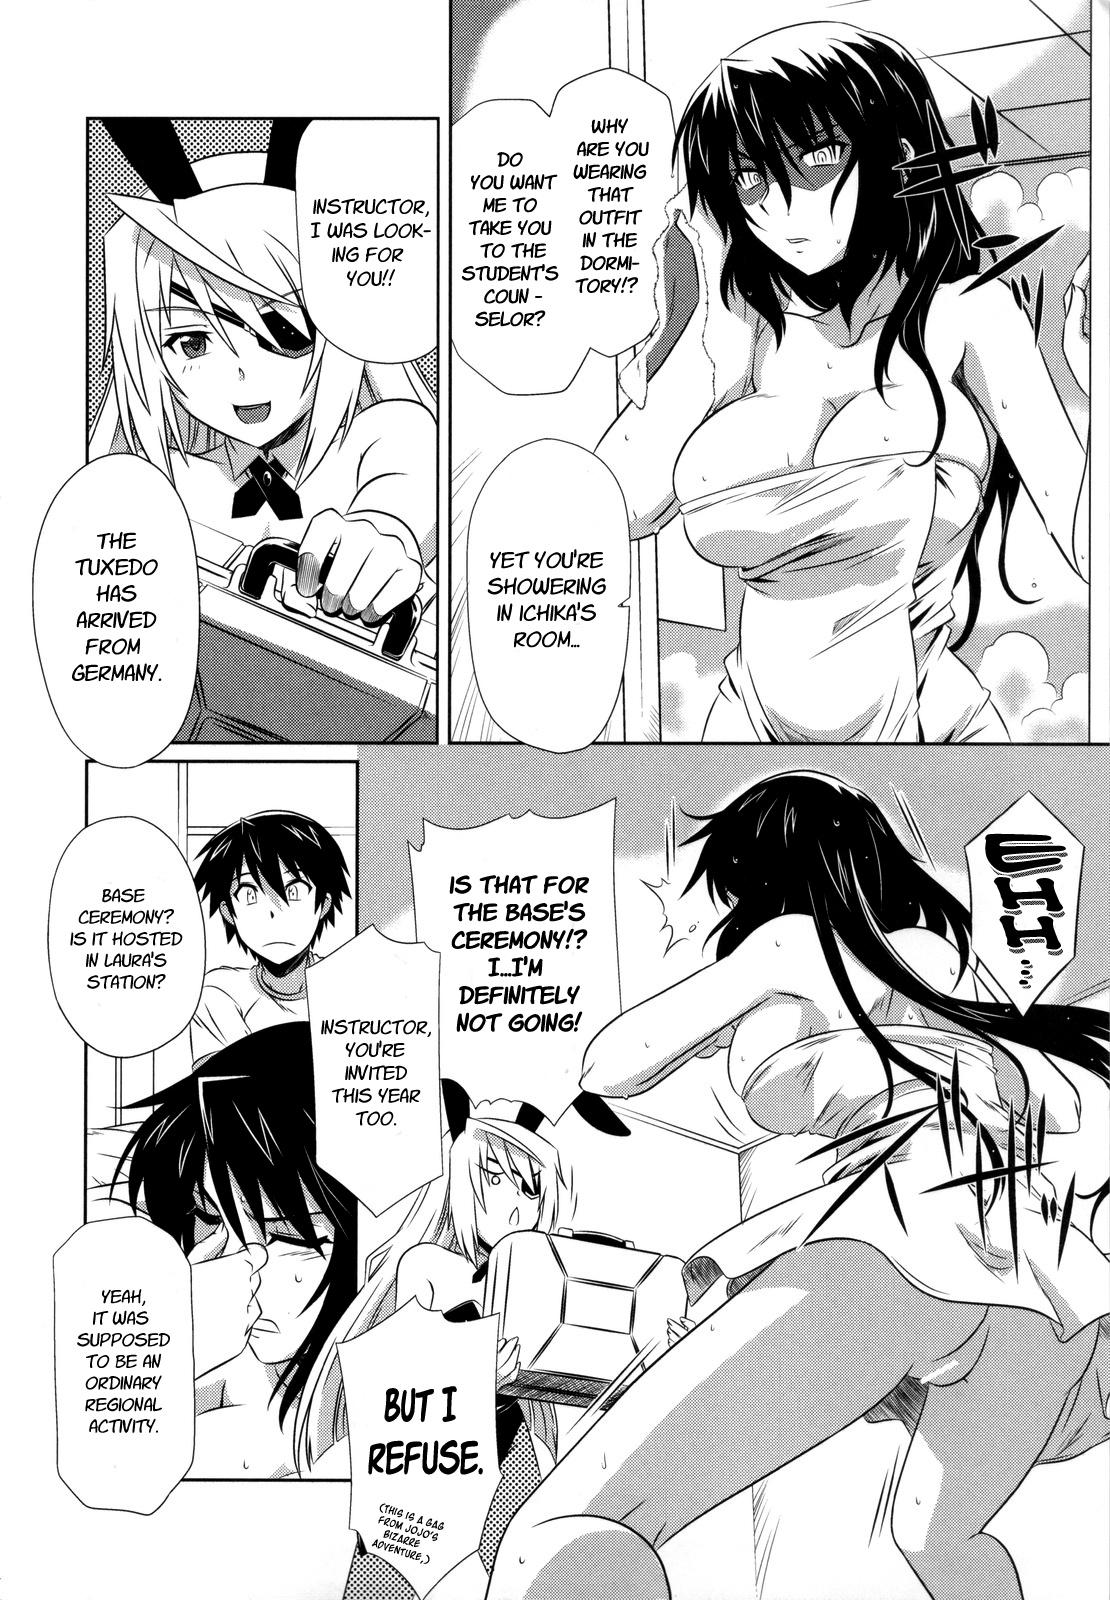 Sex Pussy is Incest Strategy 3 - Infinite stratos Stud - Page 3